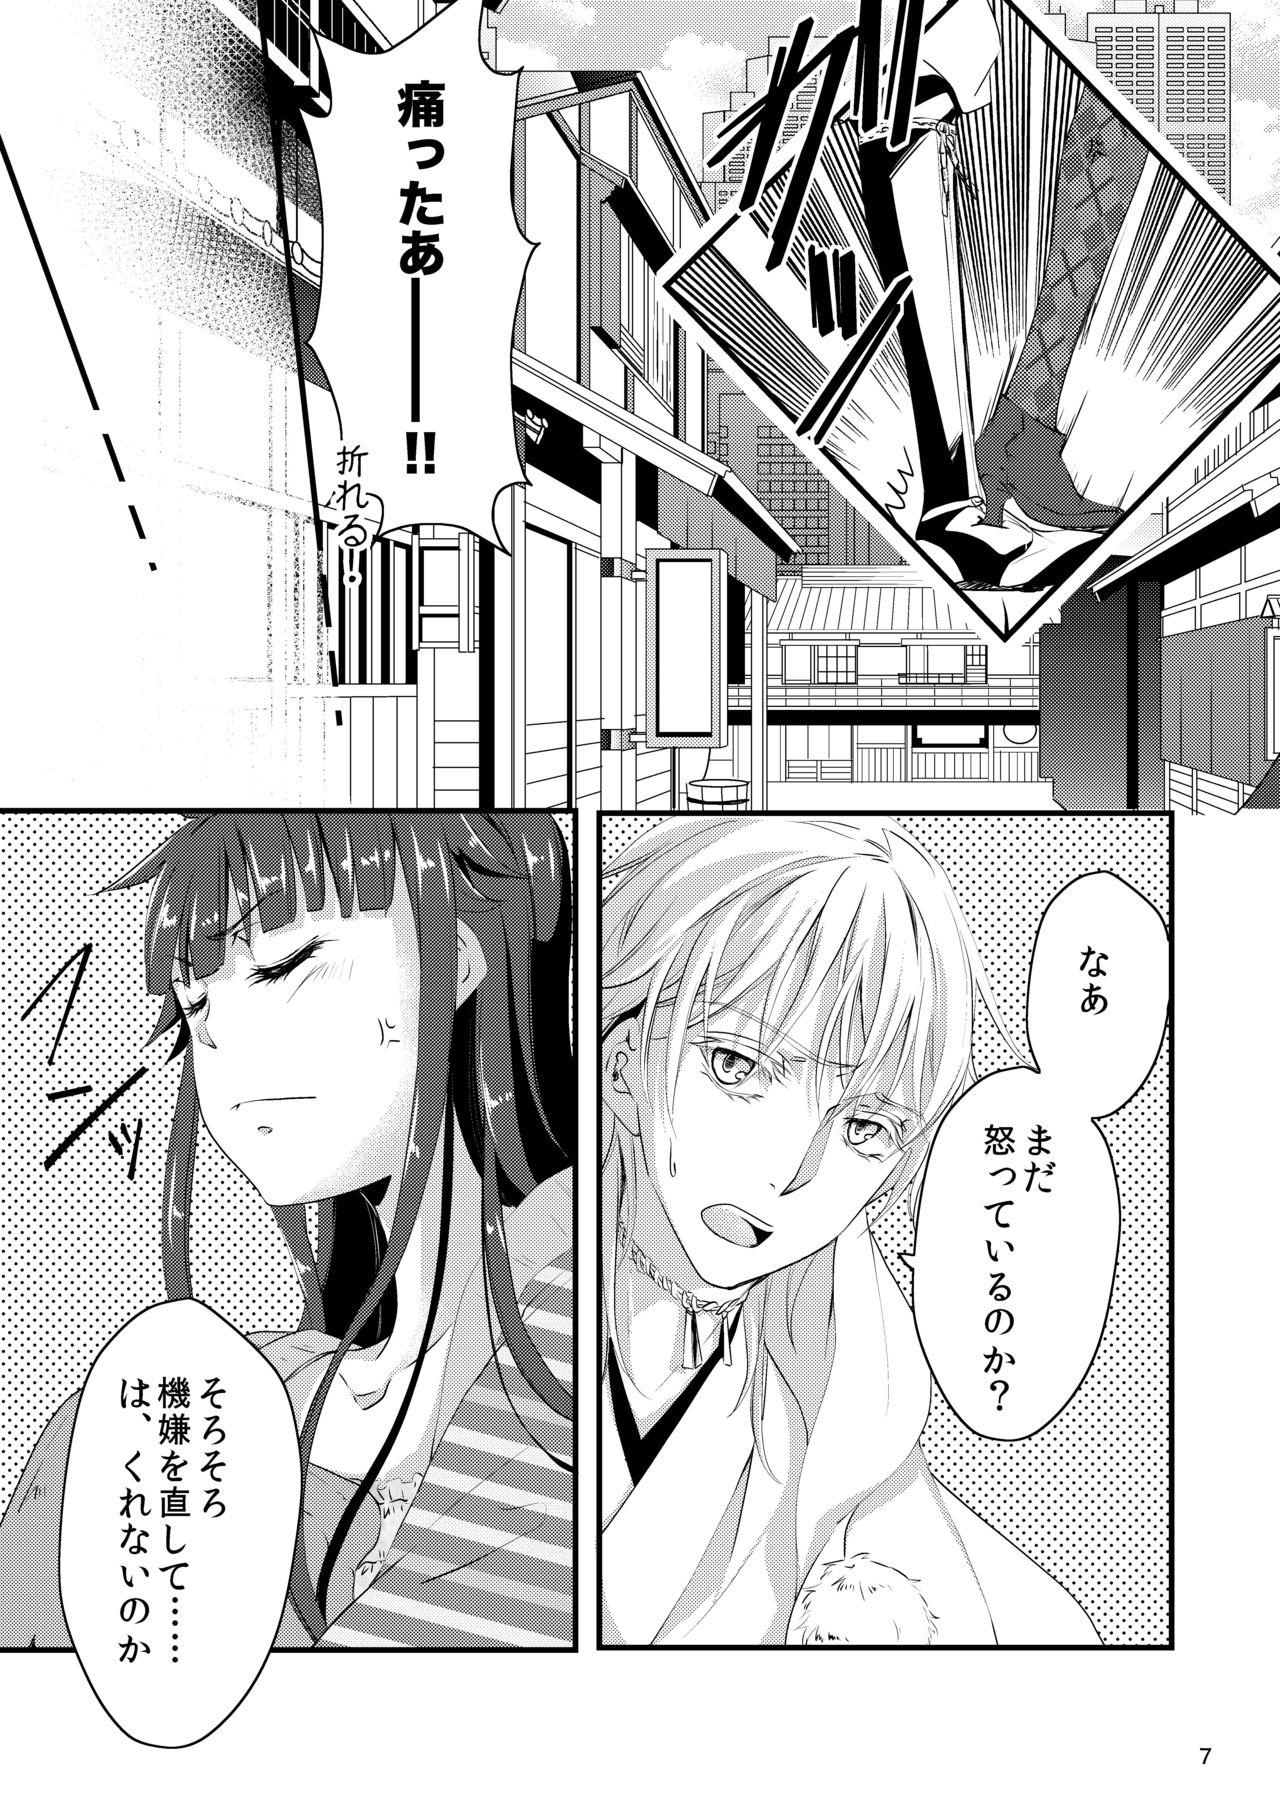 Doggystyle Porn CandyCup - Touken ranbu Outside - Page 5